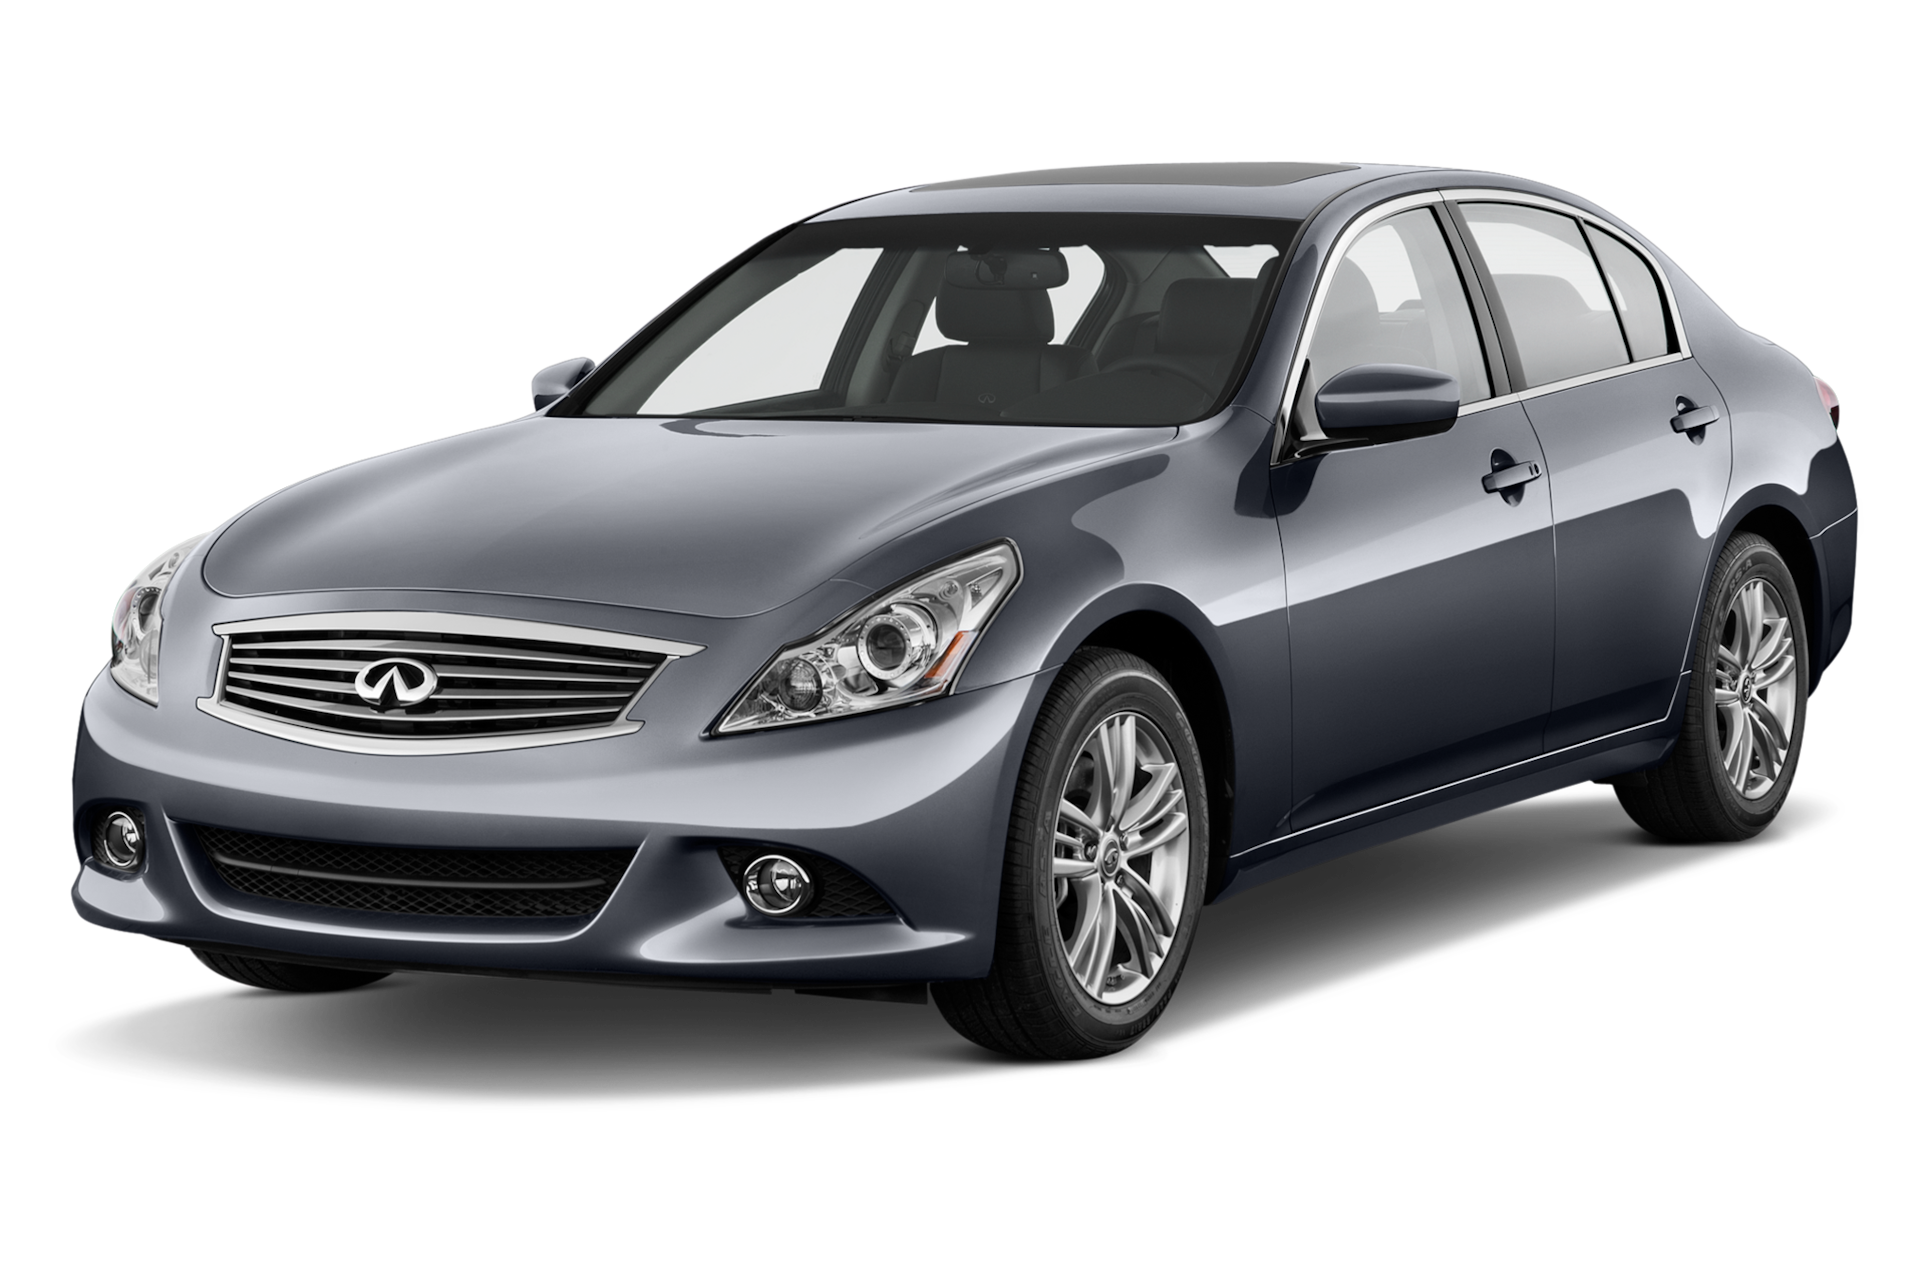 2012 Infiniti G37 Prices, Reviews, and Photos - MotorTrend